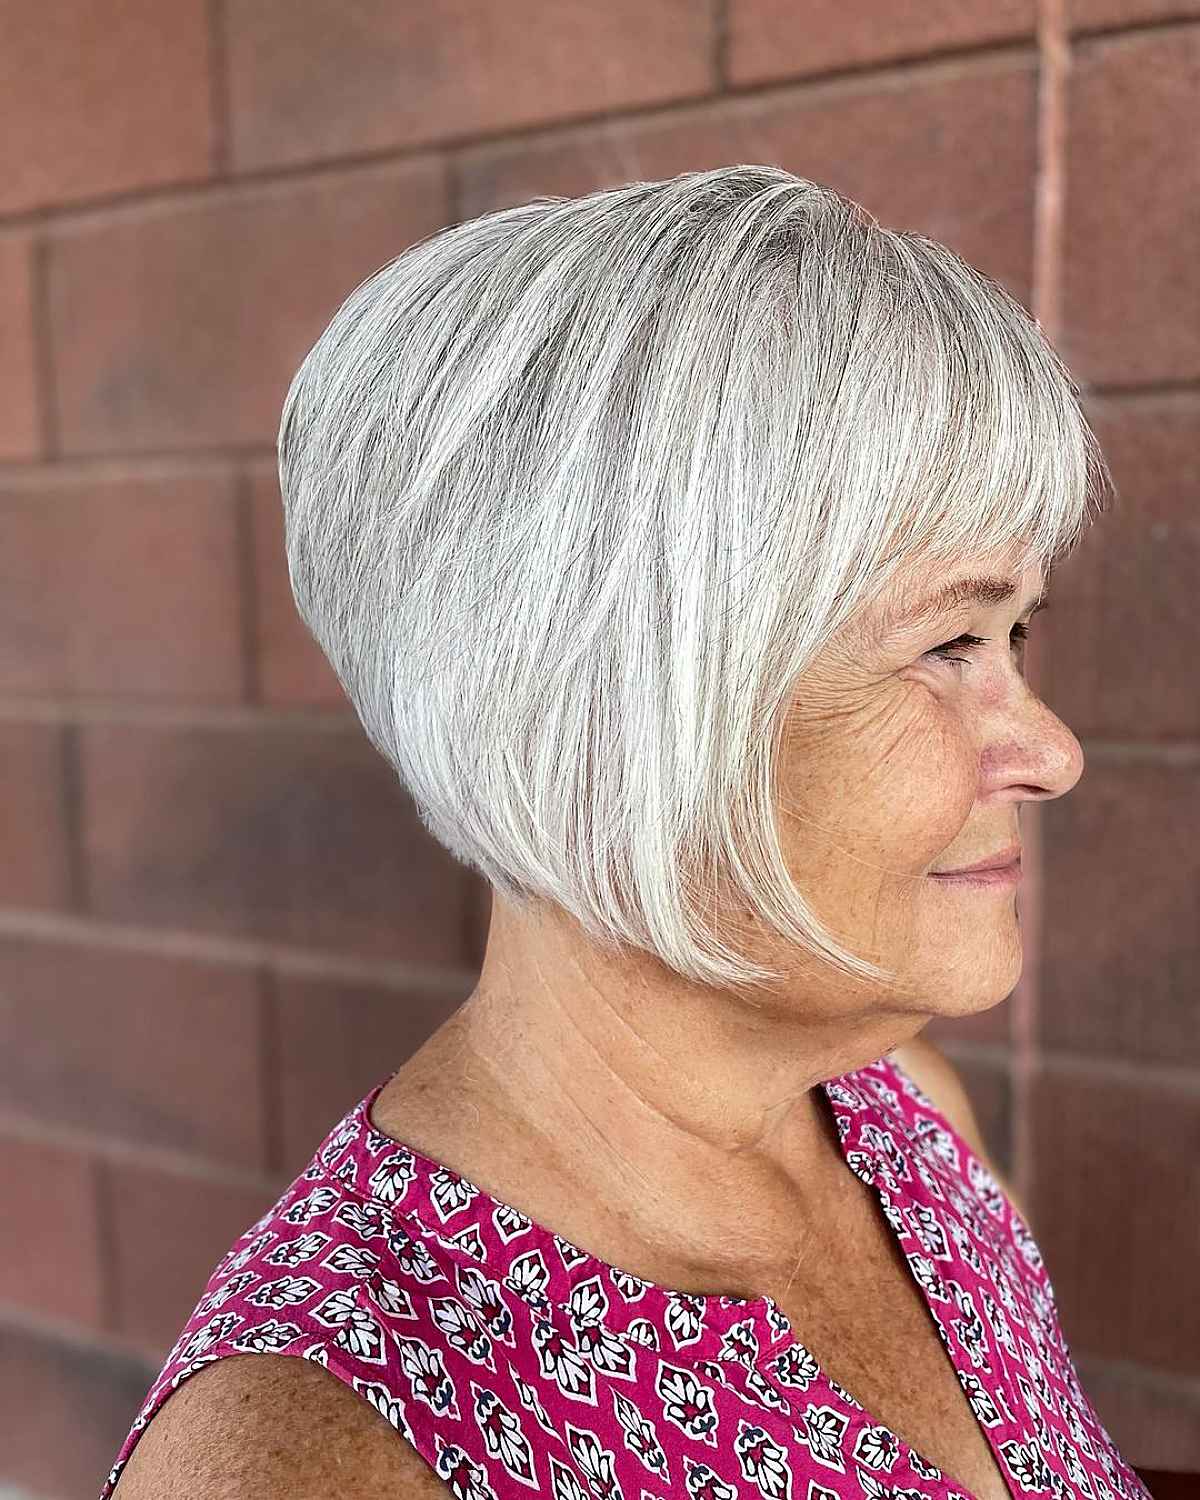 Graduated Bob Haircut for Women Passed Their 60s